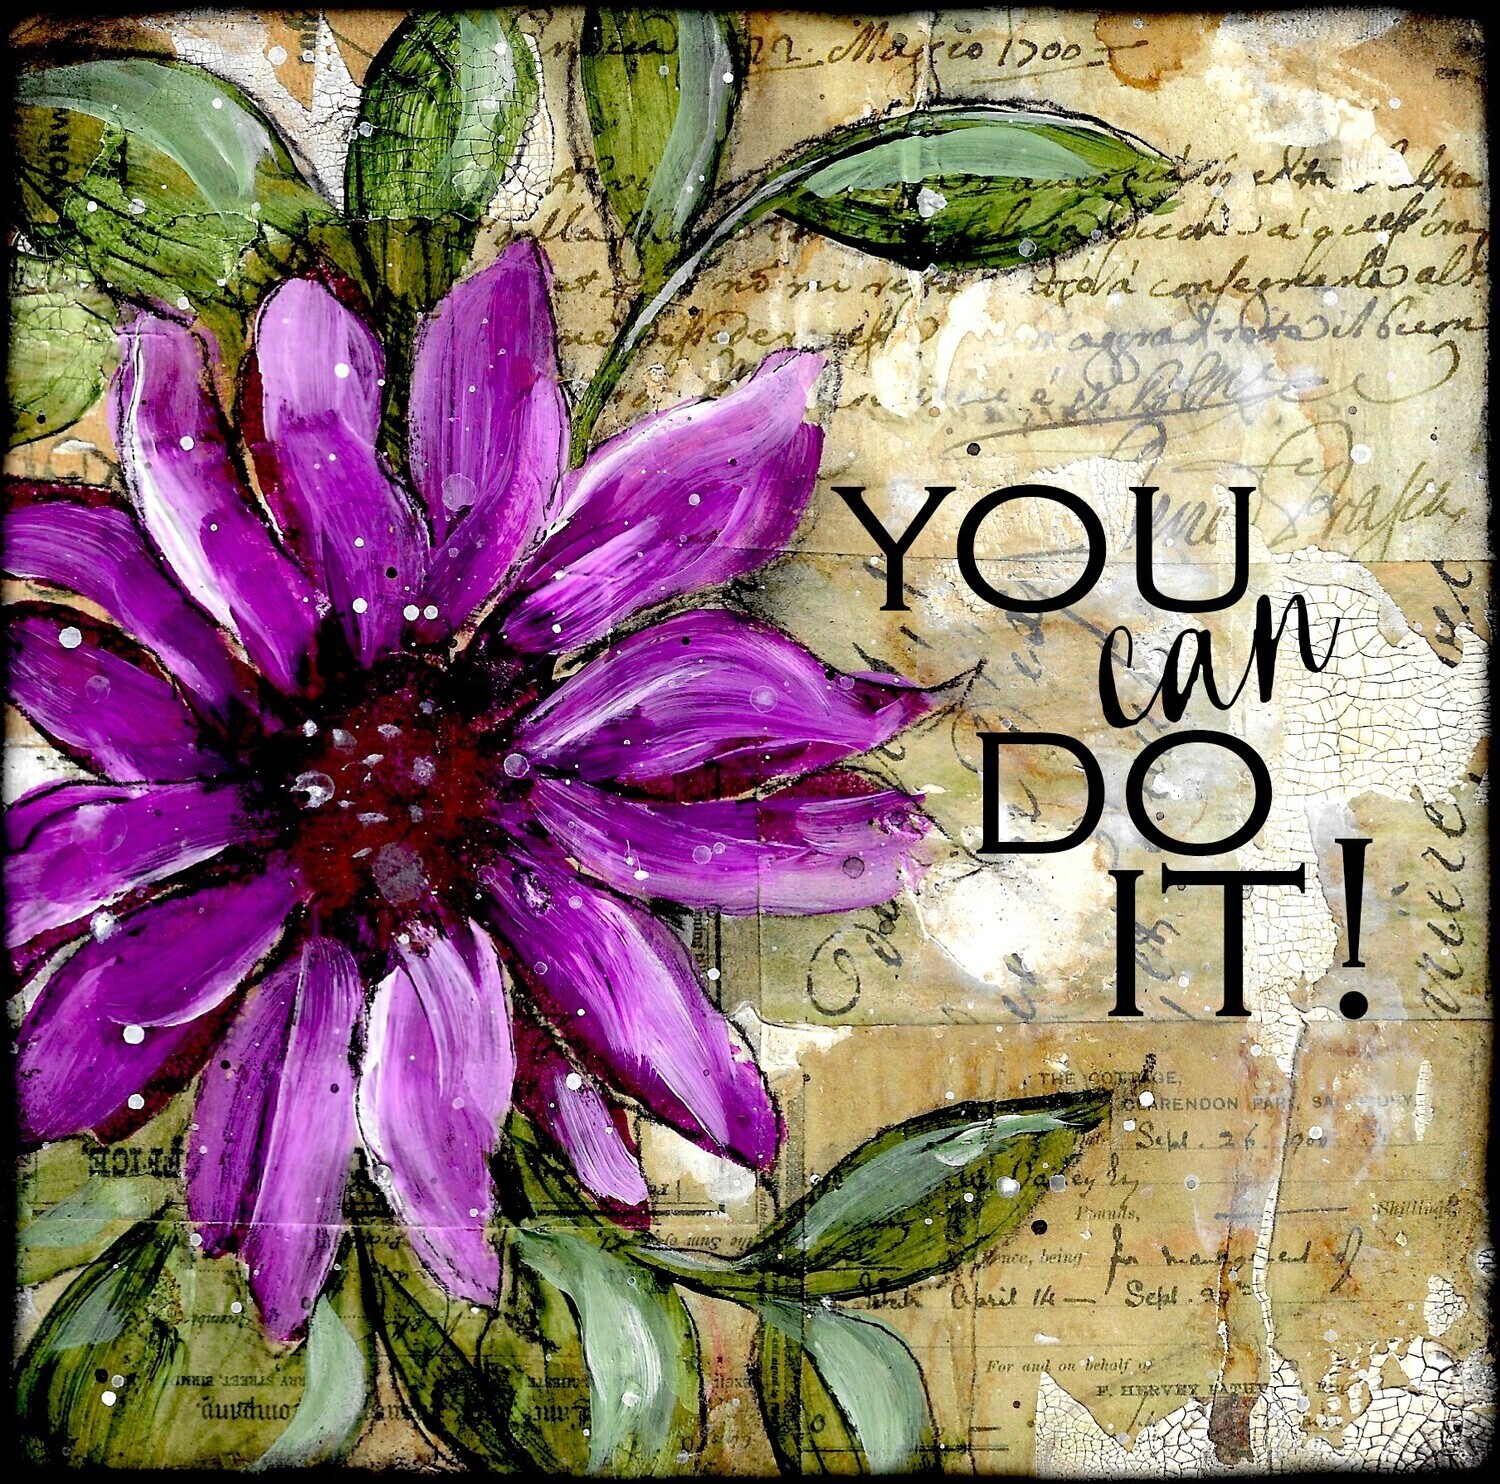 "You can do it" bright flowers 6x6 clearance